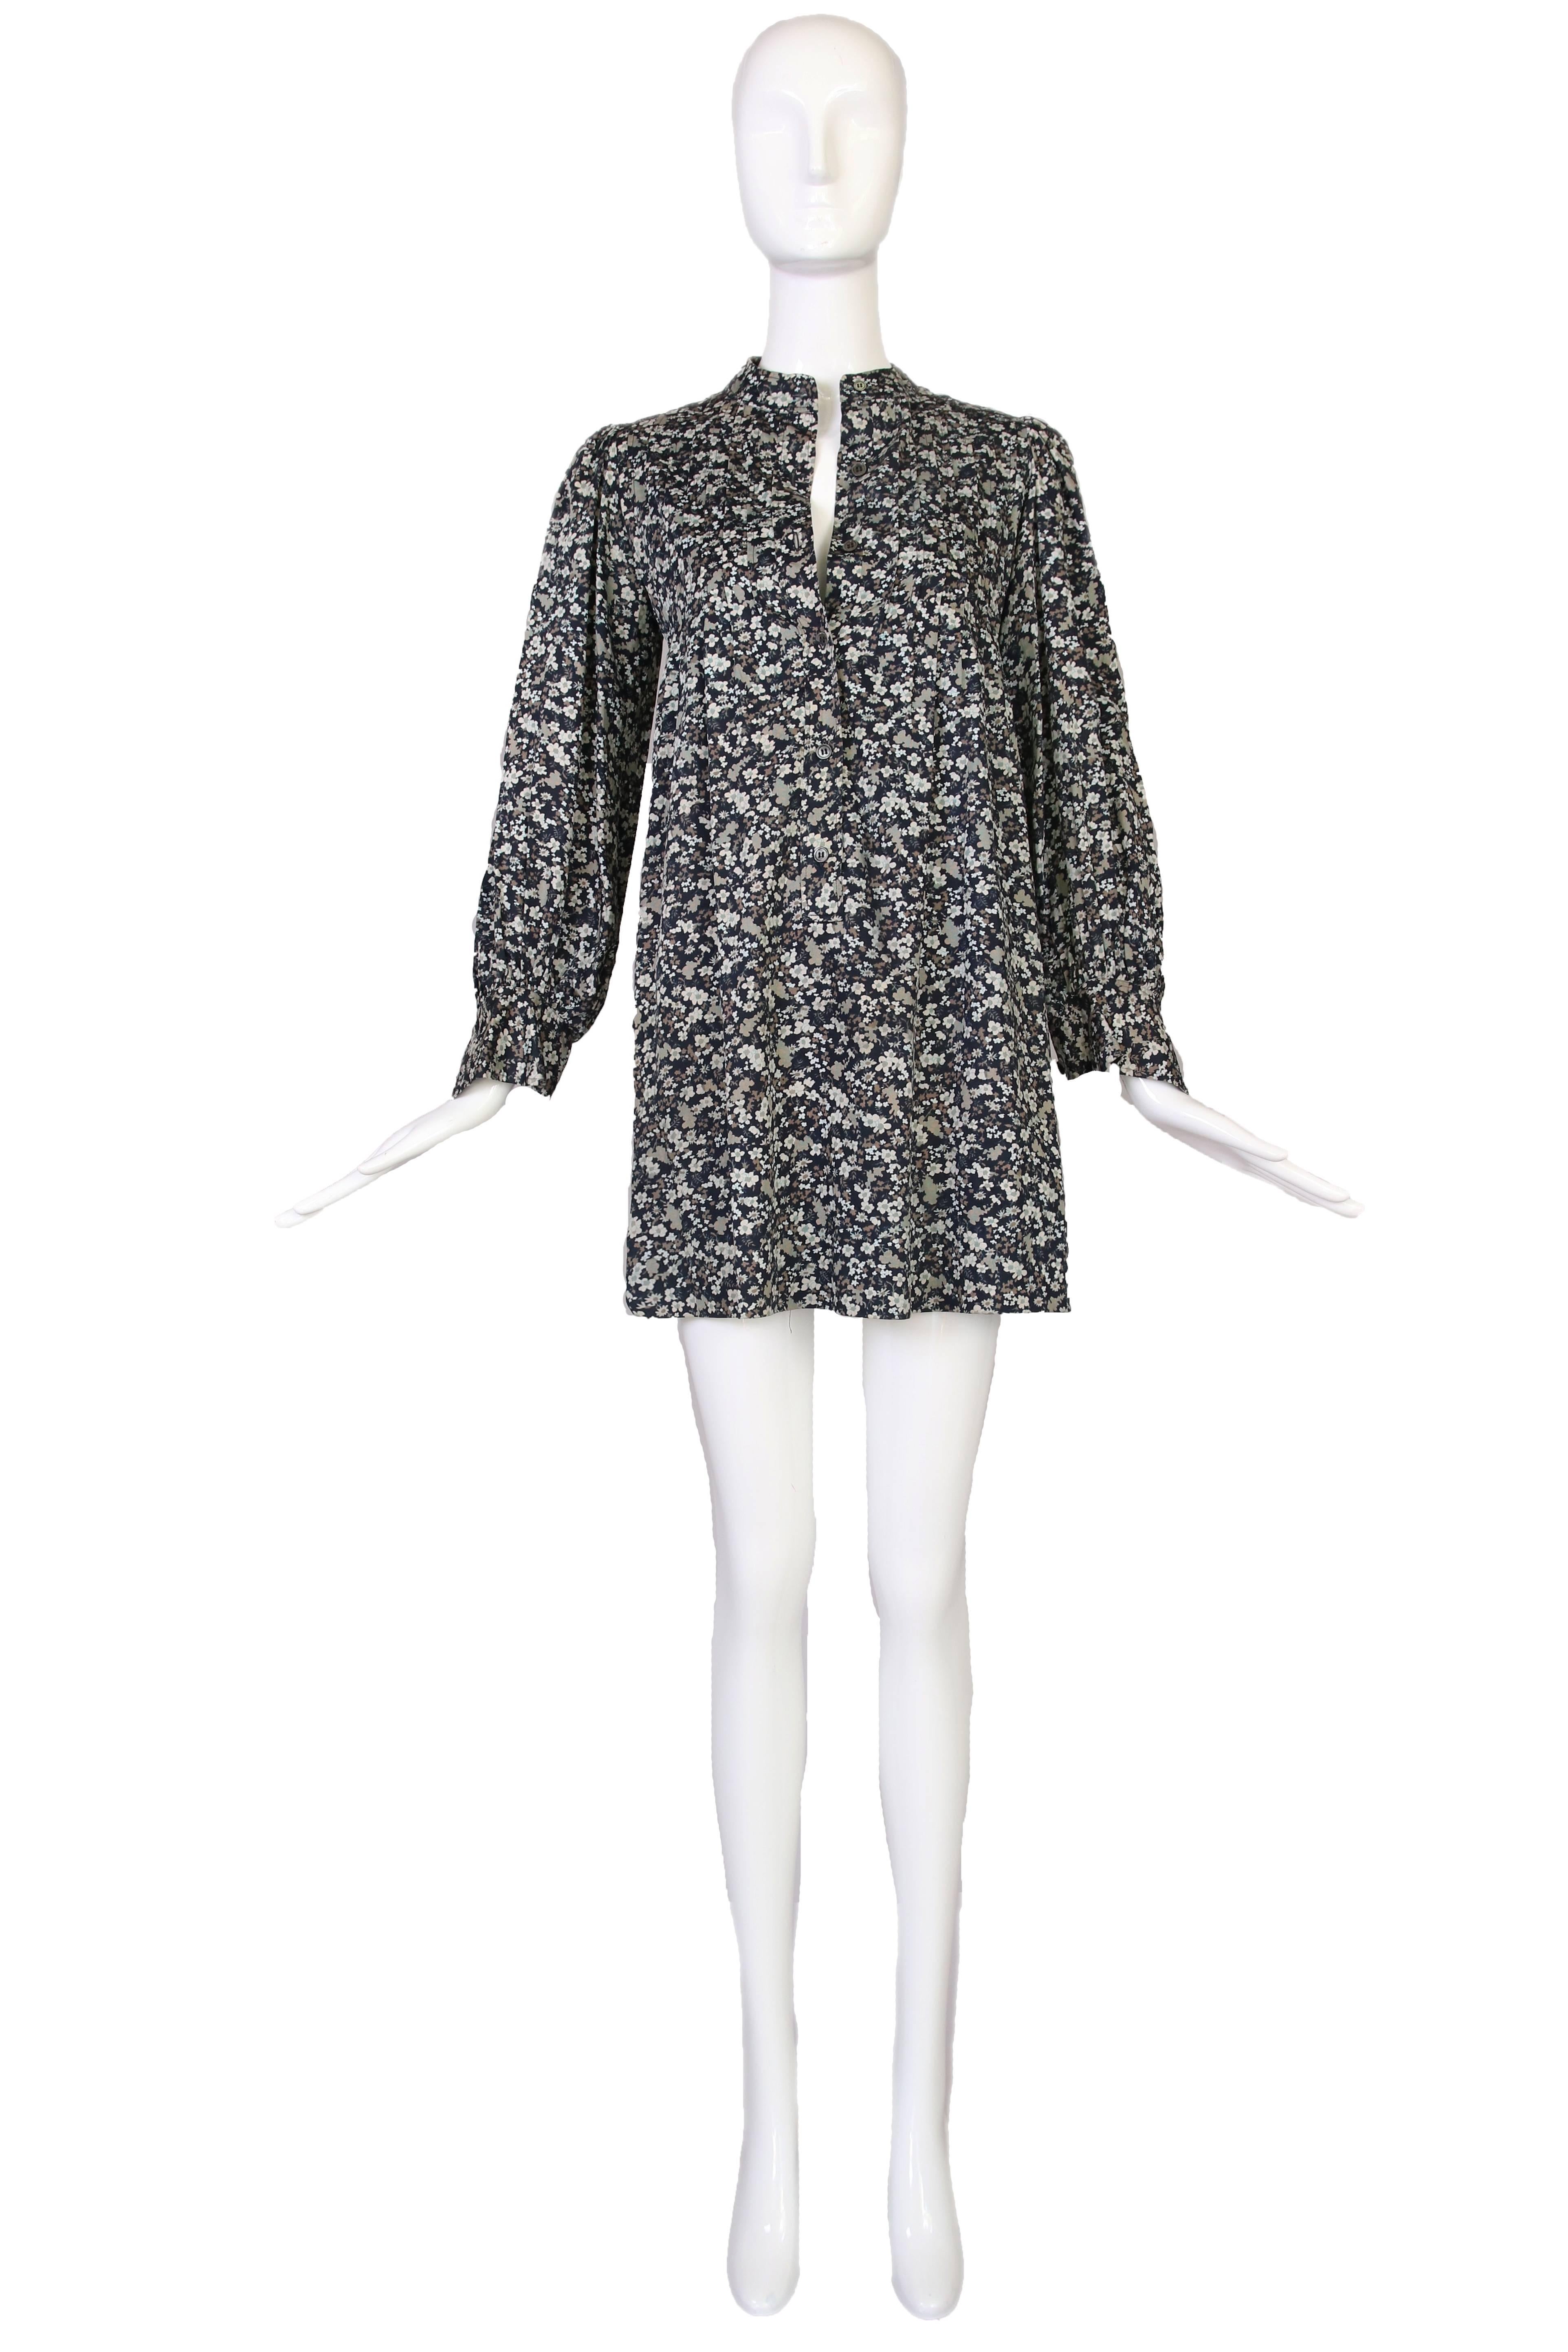 1970's Yves Saint Laurent boho cotton floral tunic top or short dress with smocking at the bodice and stand collar that buttons from mid-bodice to top of the collar. In excellent condition. Size 42.
MEASUREMENTS:
Bust - 34-36